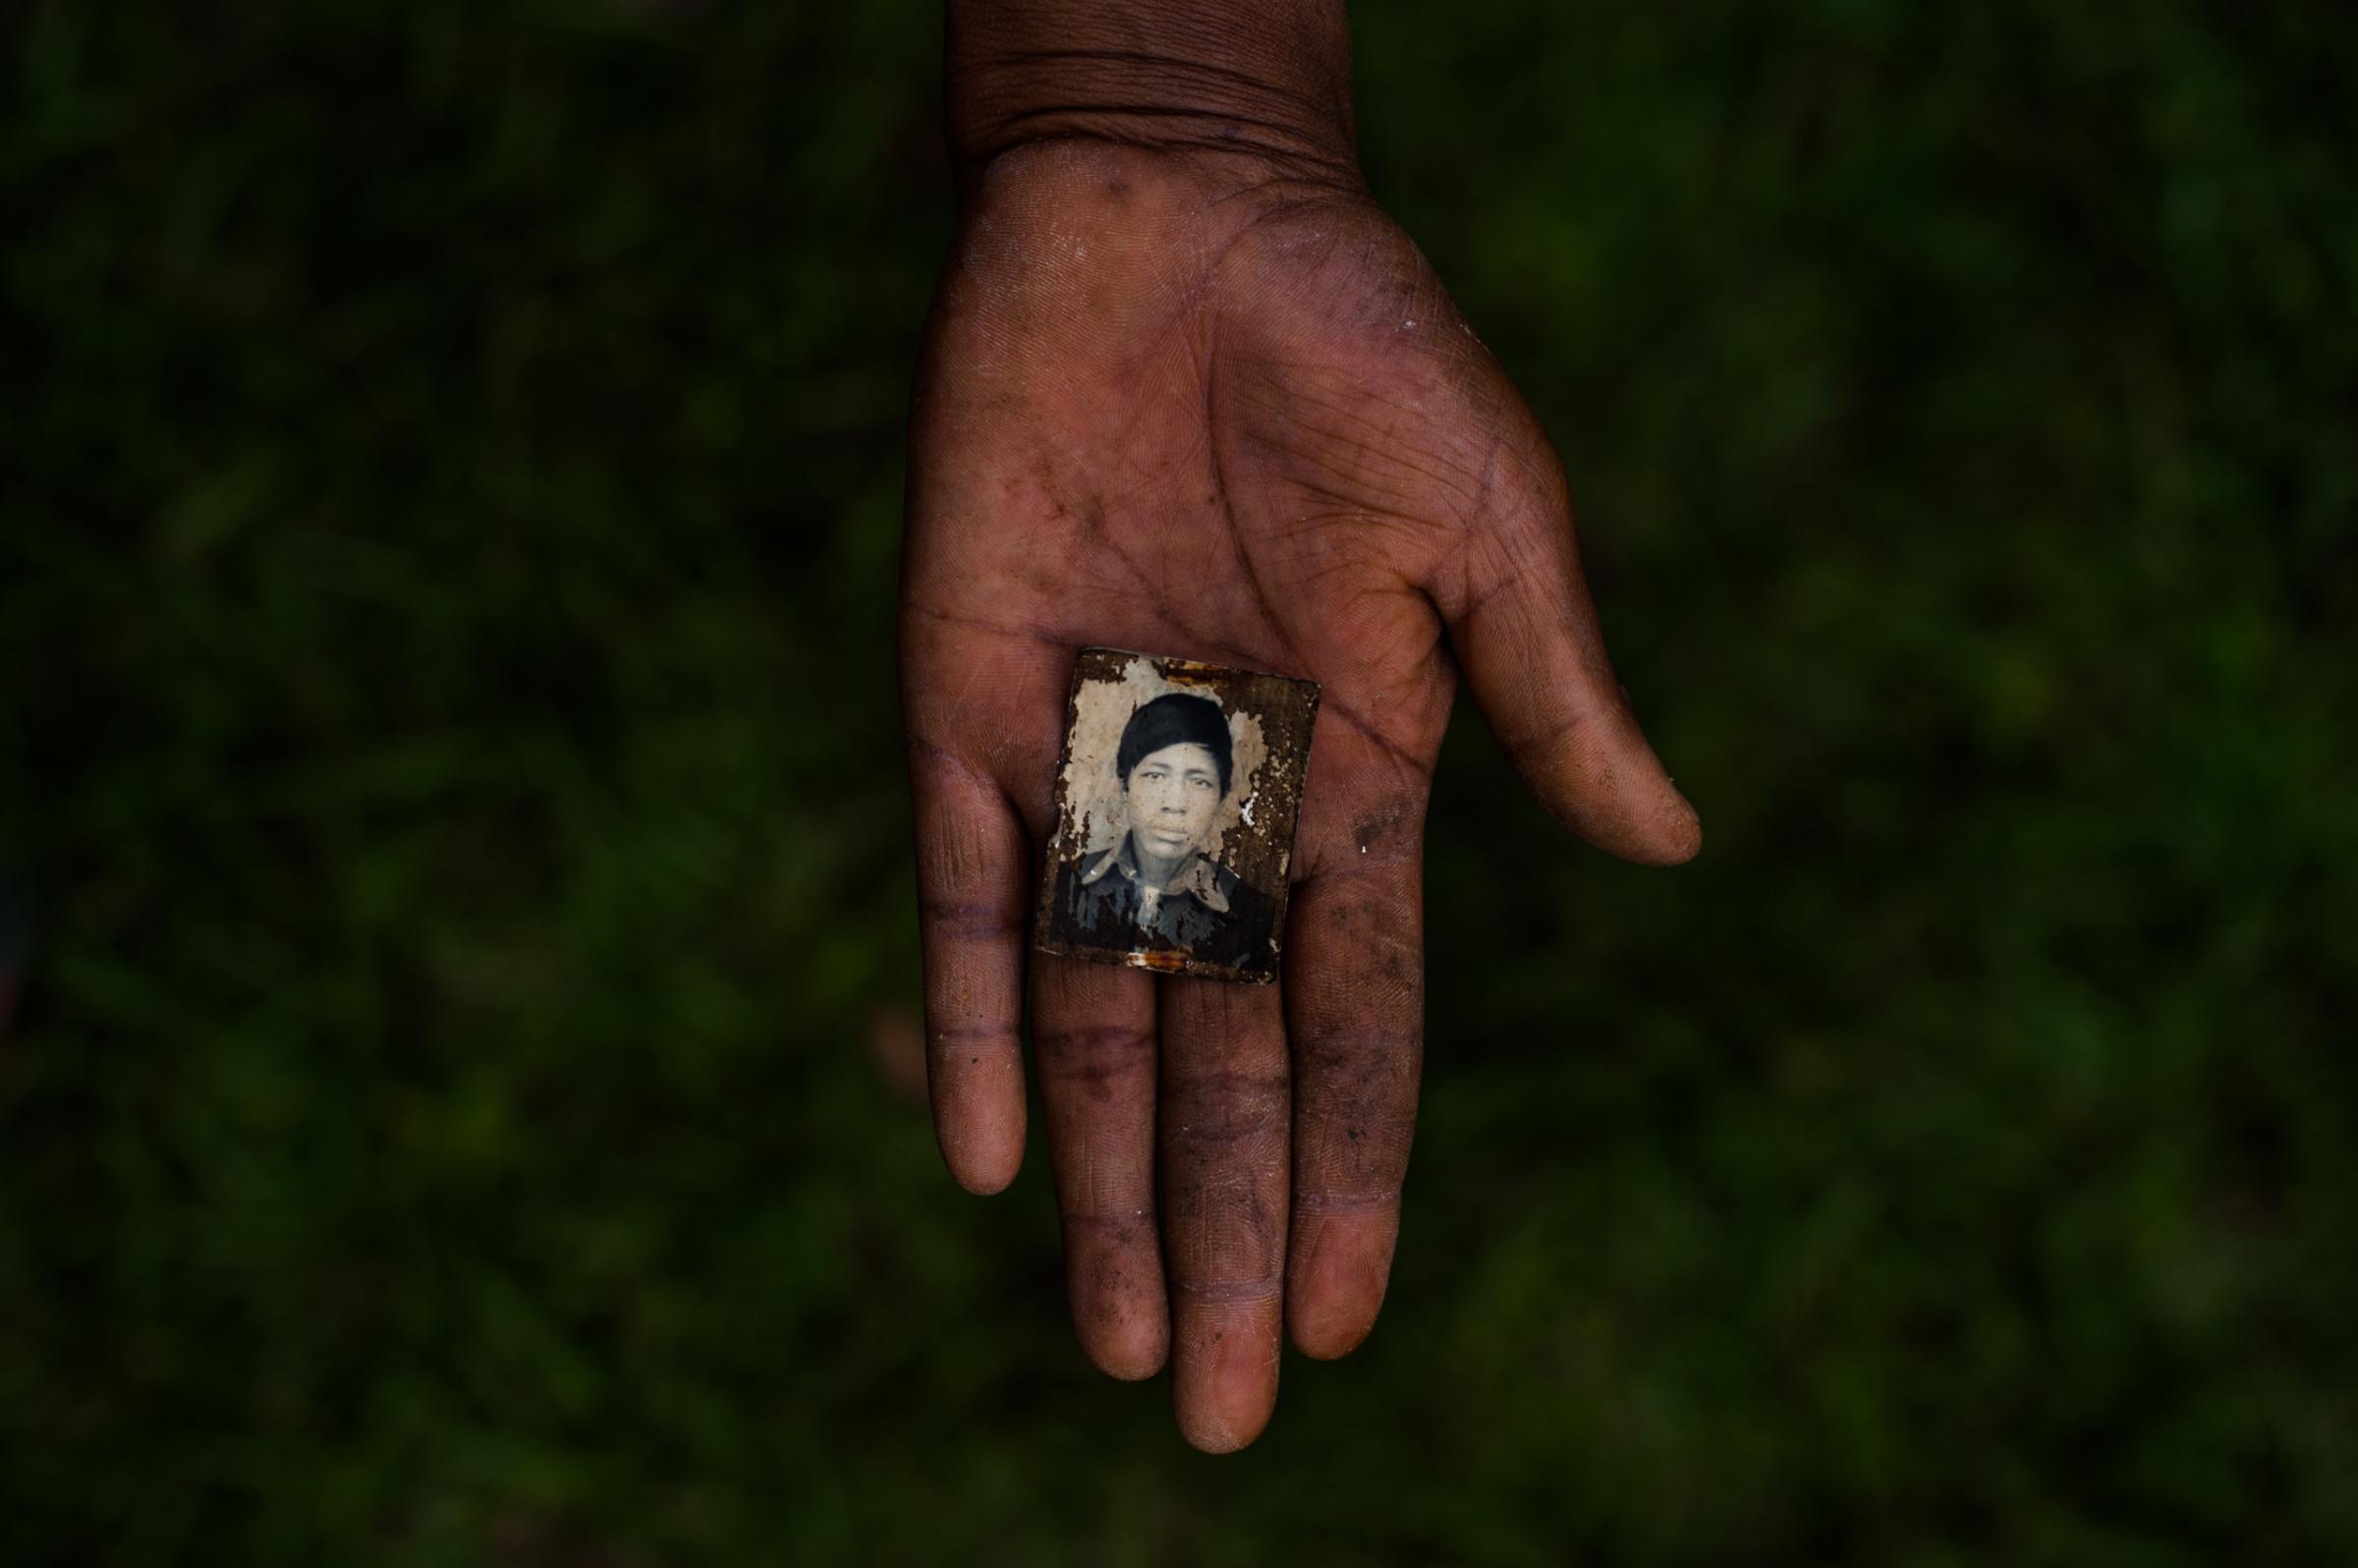 Domingo Rodriguez, 15. He accompanied his father to the Xolosinay military base in Cotzal to pick up a flag that they had to place on the roof of their house to prevent planes from bombarding it.  He has been disappeared, along with his father, since January 31st, 1982.